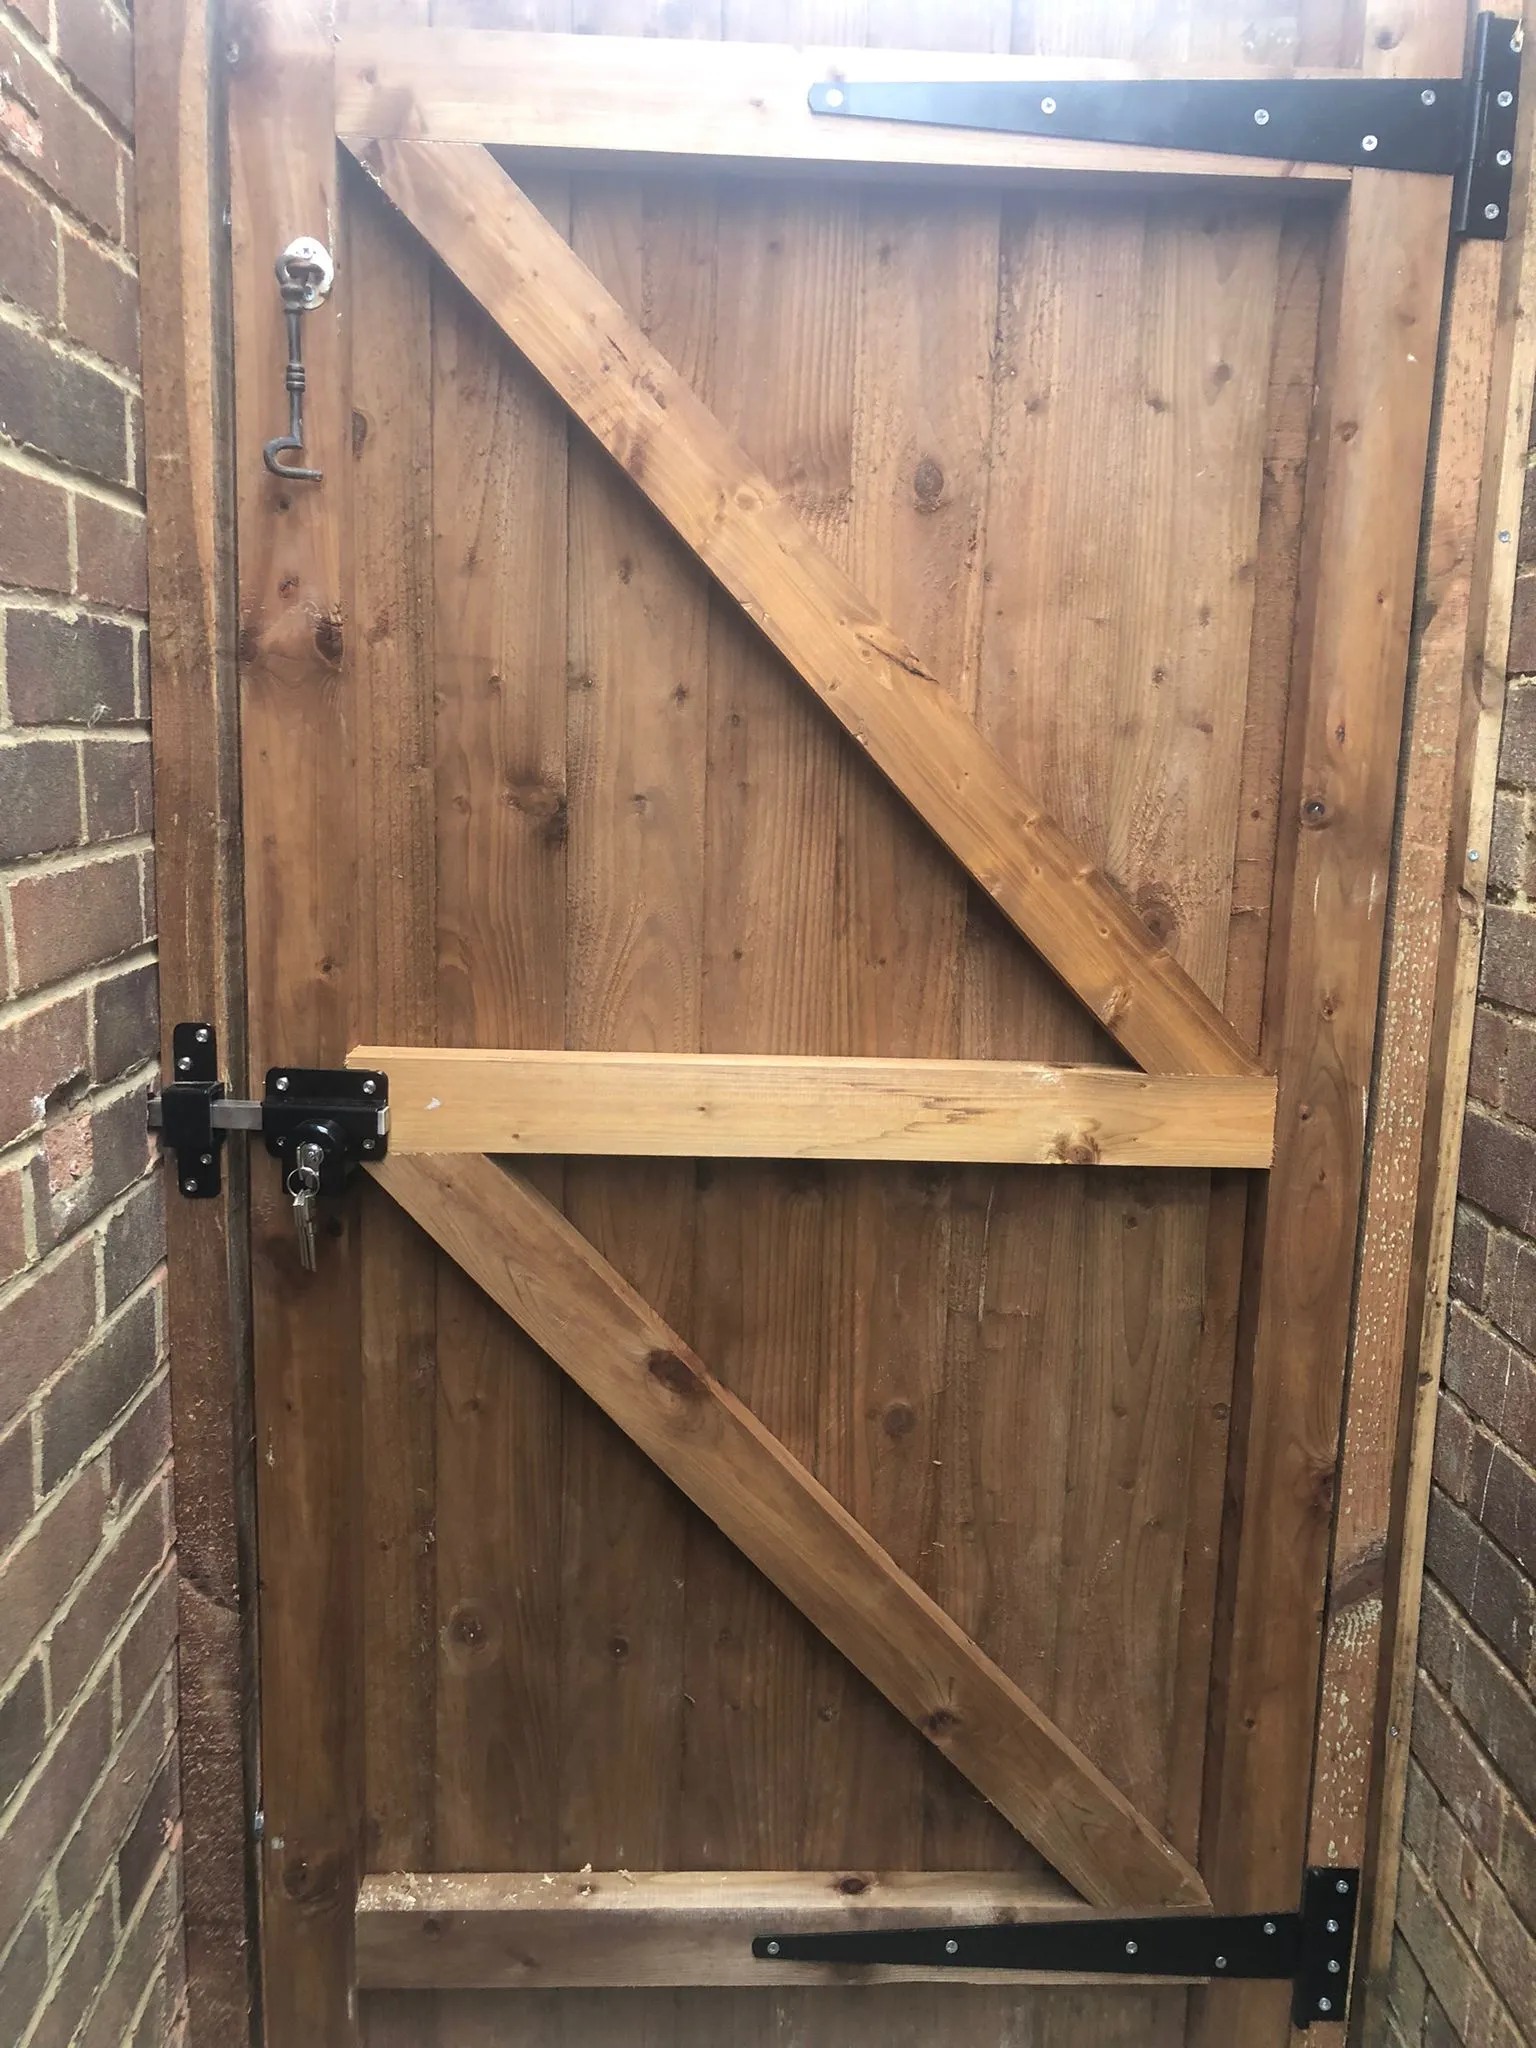 a close up of a wooden door on a brick wall